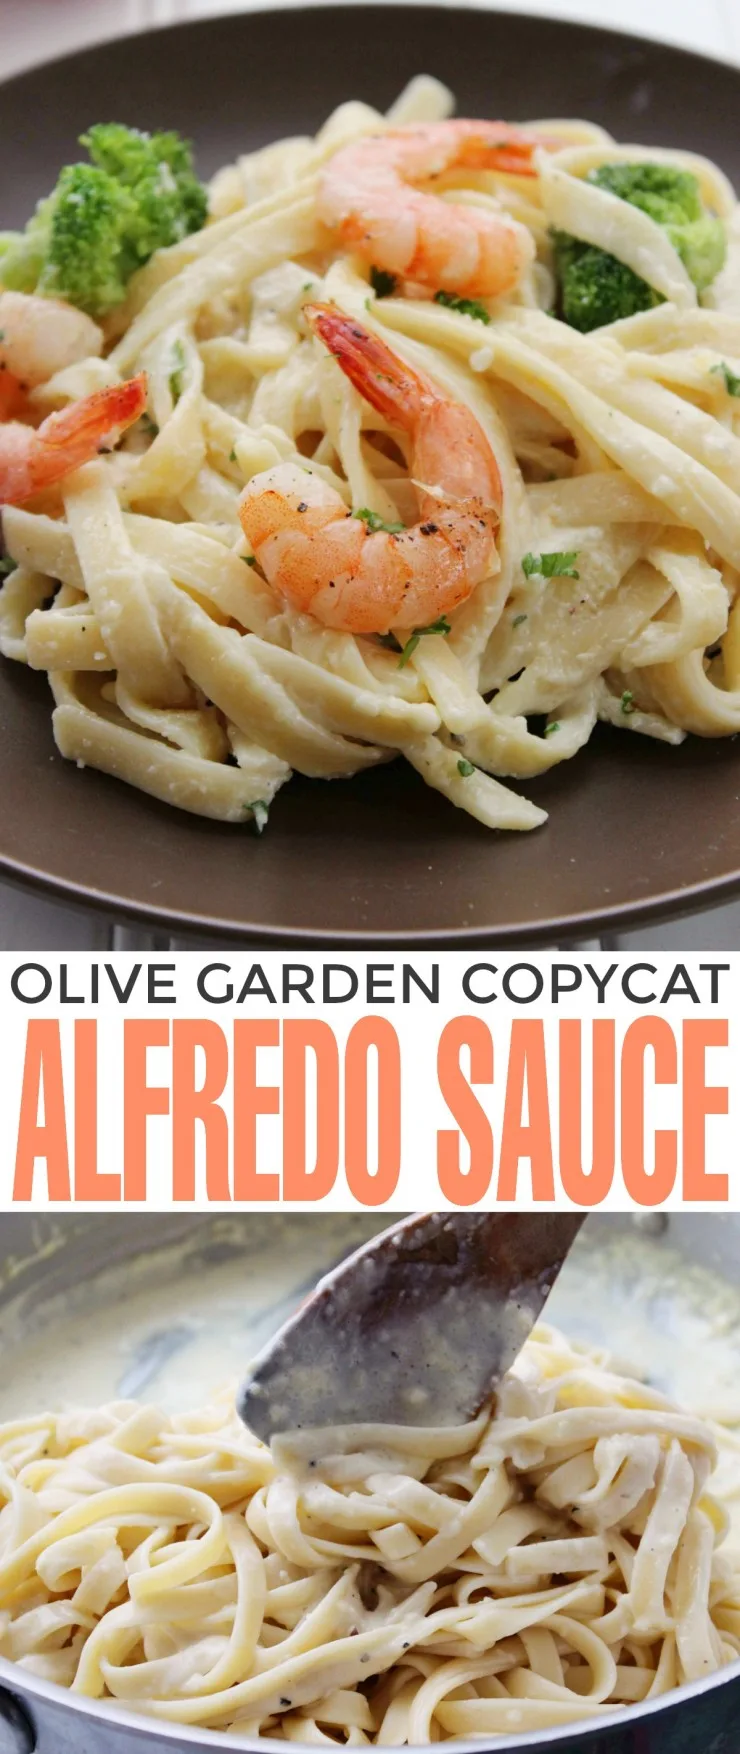 This is the BEST Olive Garden Alfredo Sauce Copycat Recipe! If you love Italian Food, you will love this dish (and sauce recipe!)